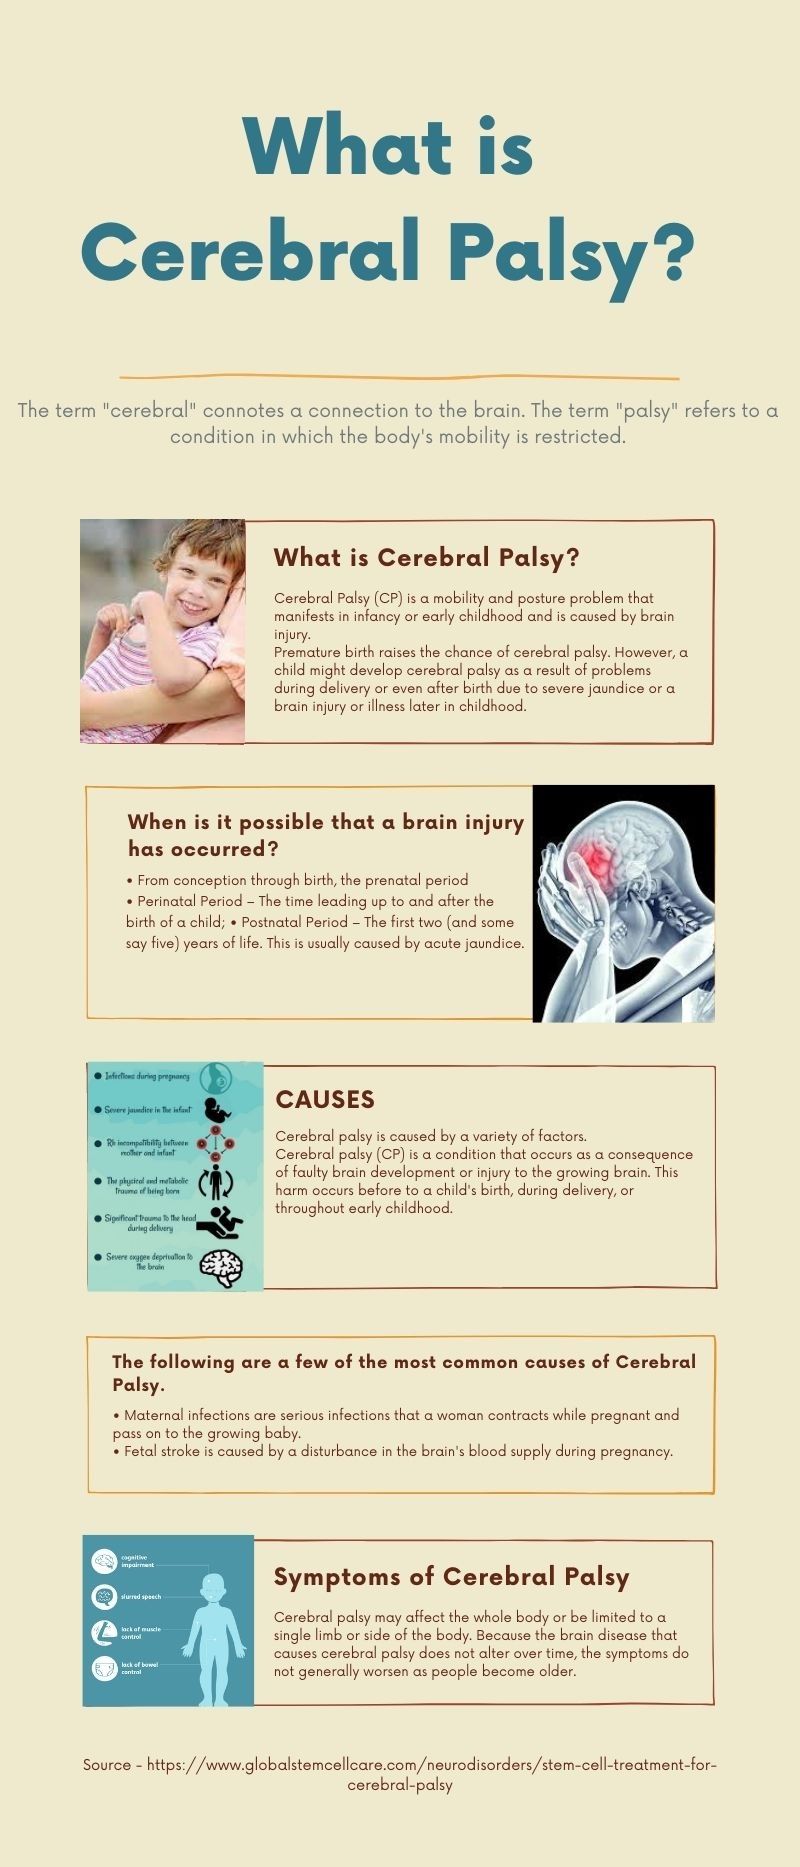 What is Cerebral Palsy